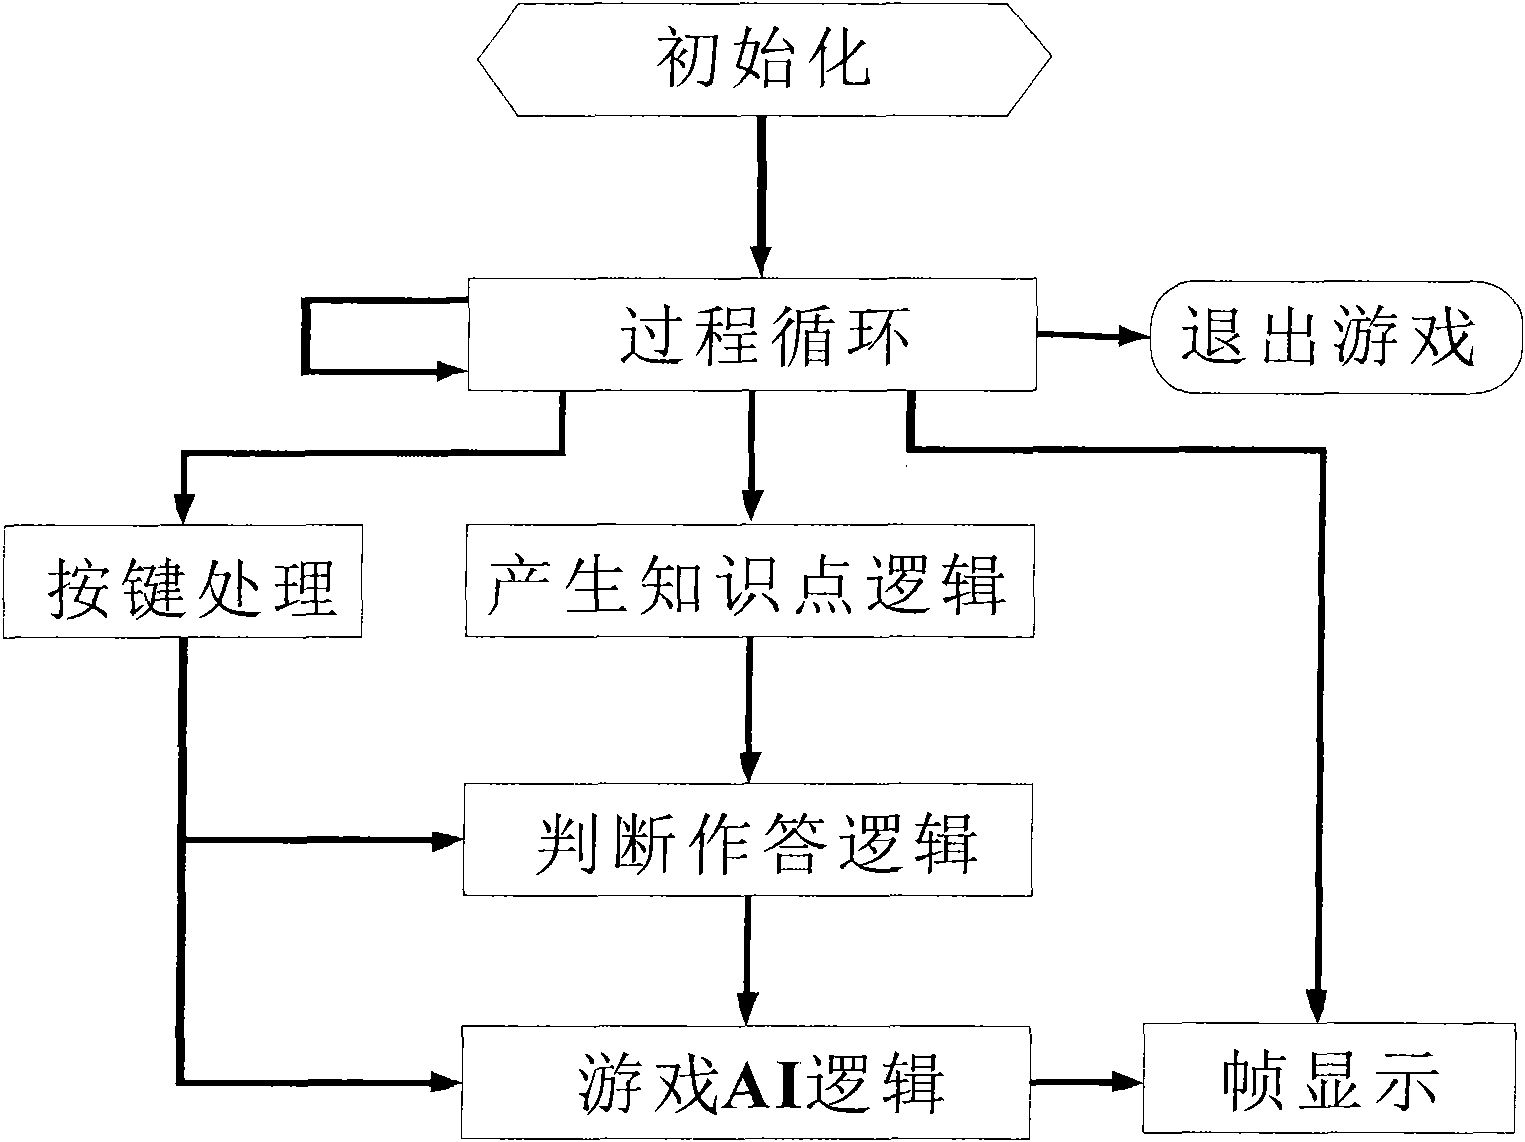 Card learning system and method